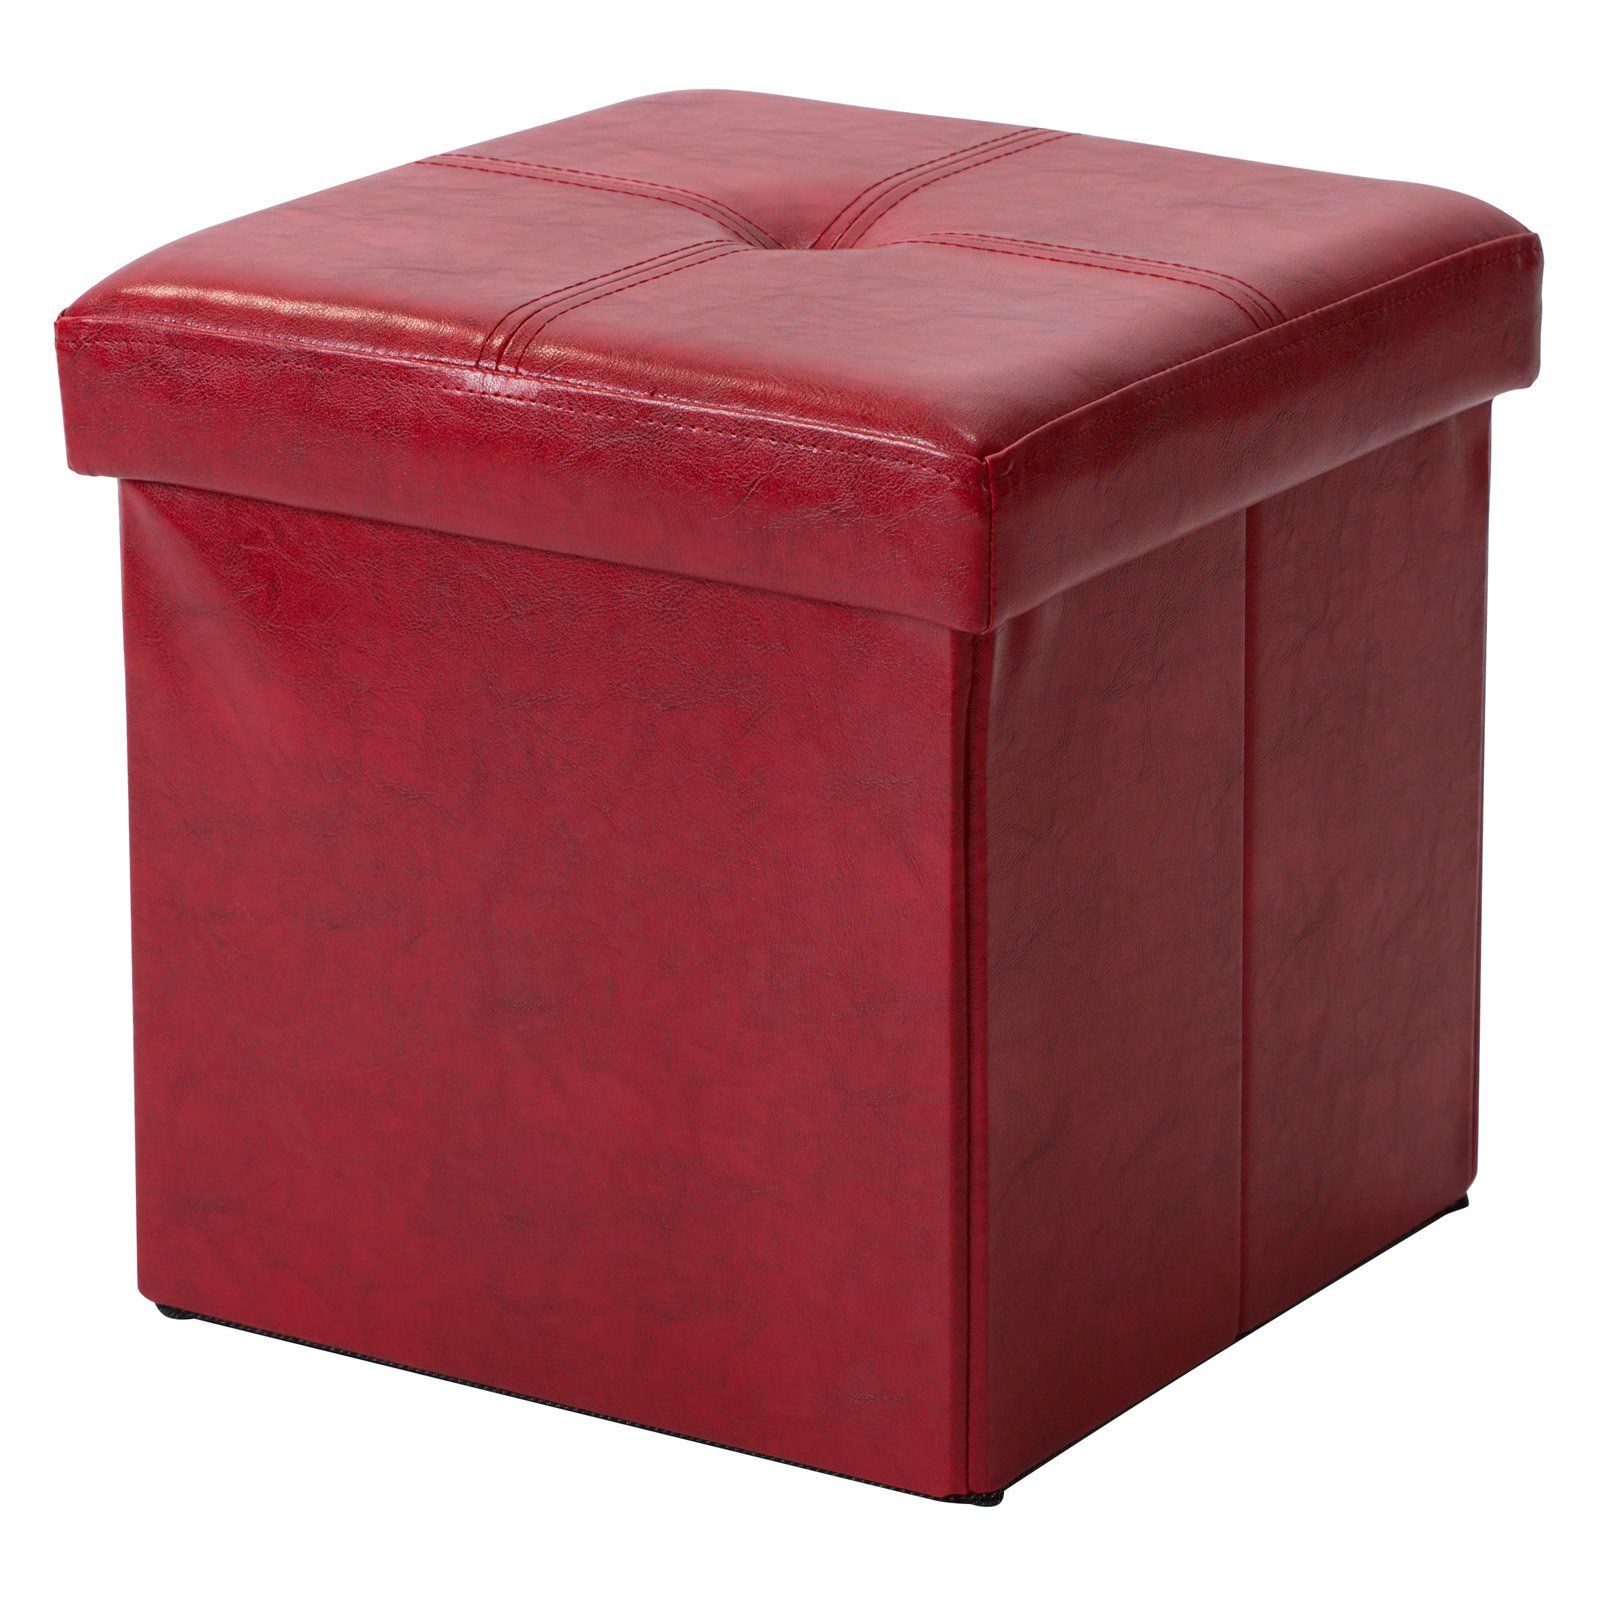 Most Popular Solid Cuboid Pouf Ottomans With Simplify Faux Leather Folding Storage Ottoman Cube In Red – Walmart (View 3 of 10)